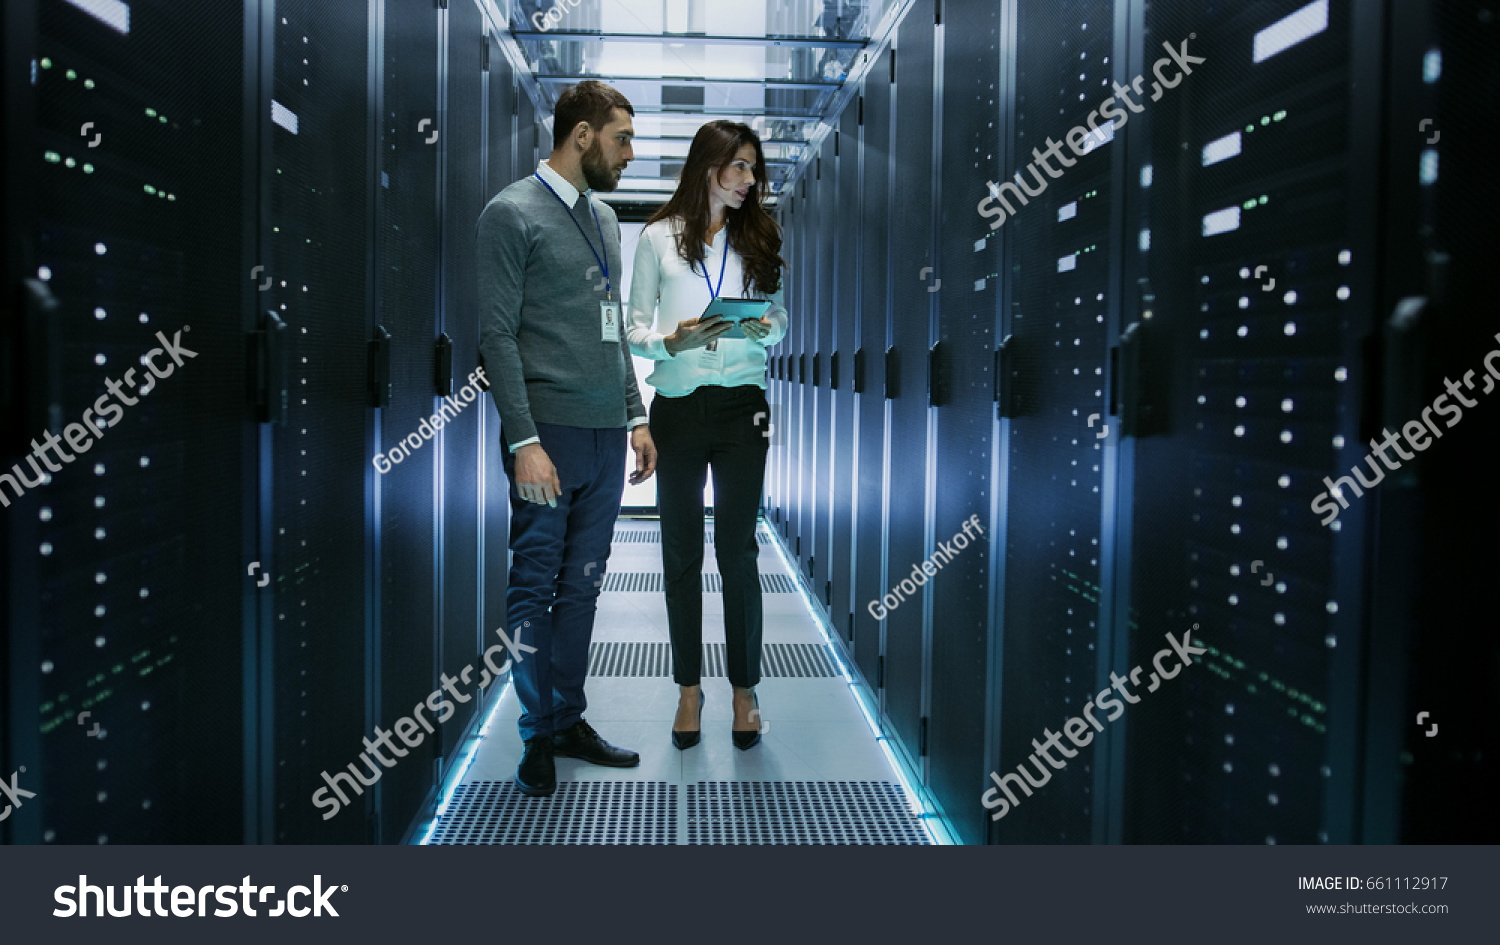 Female and Male IT Engineers Discussing Technical Details in a Working Data Center/ Server Room. #661112917